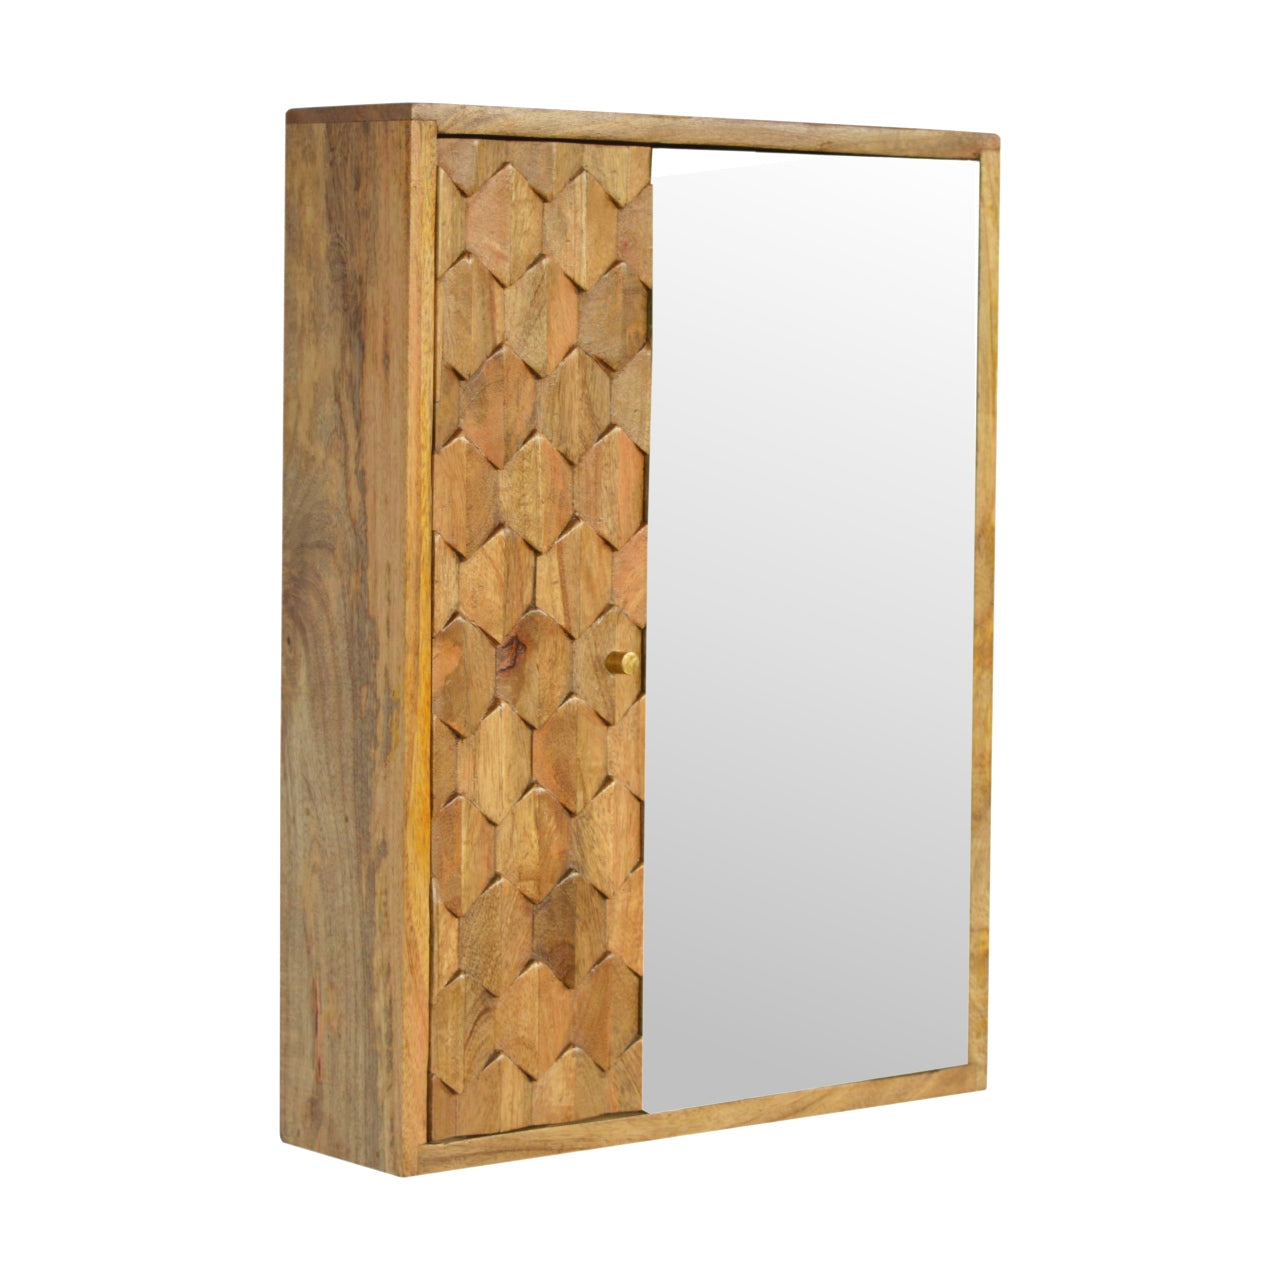 Solid Wood Pineapple Carved Sliding Wall Mirror Cabinet